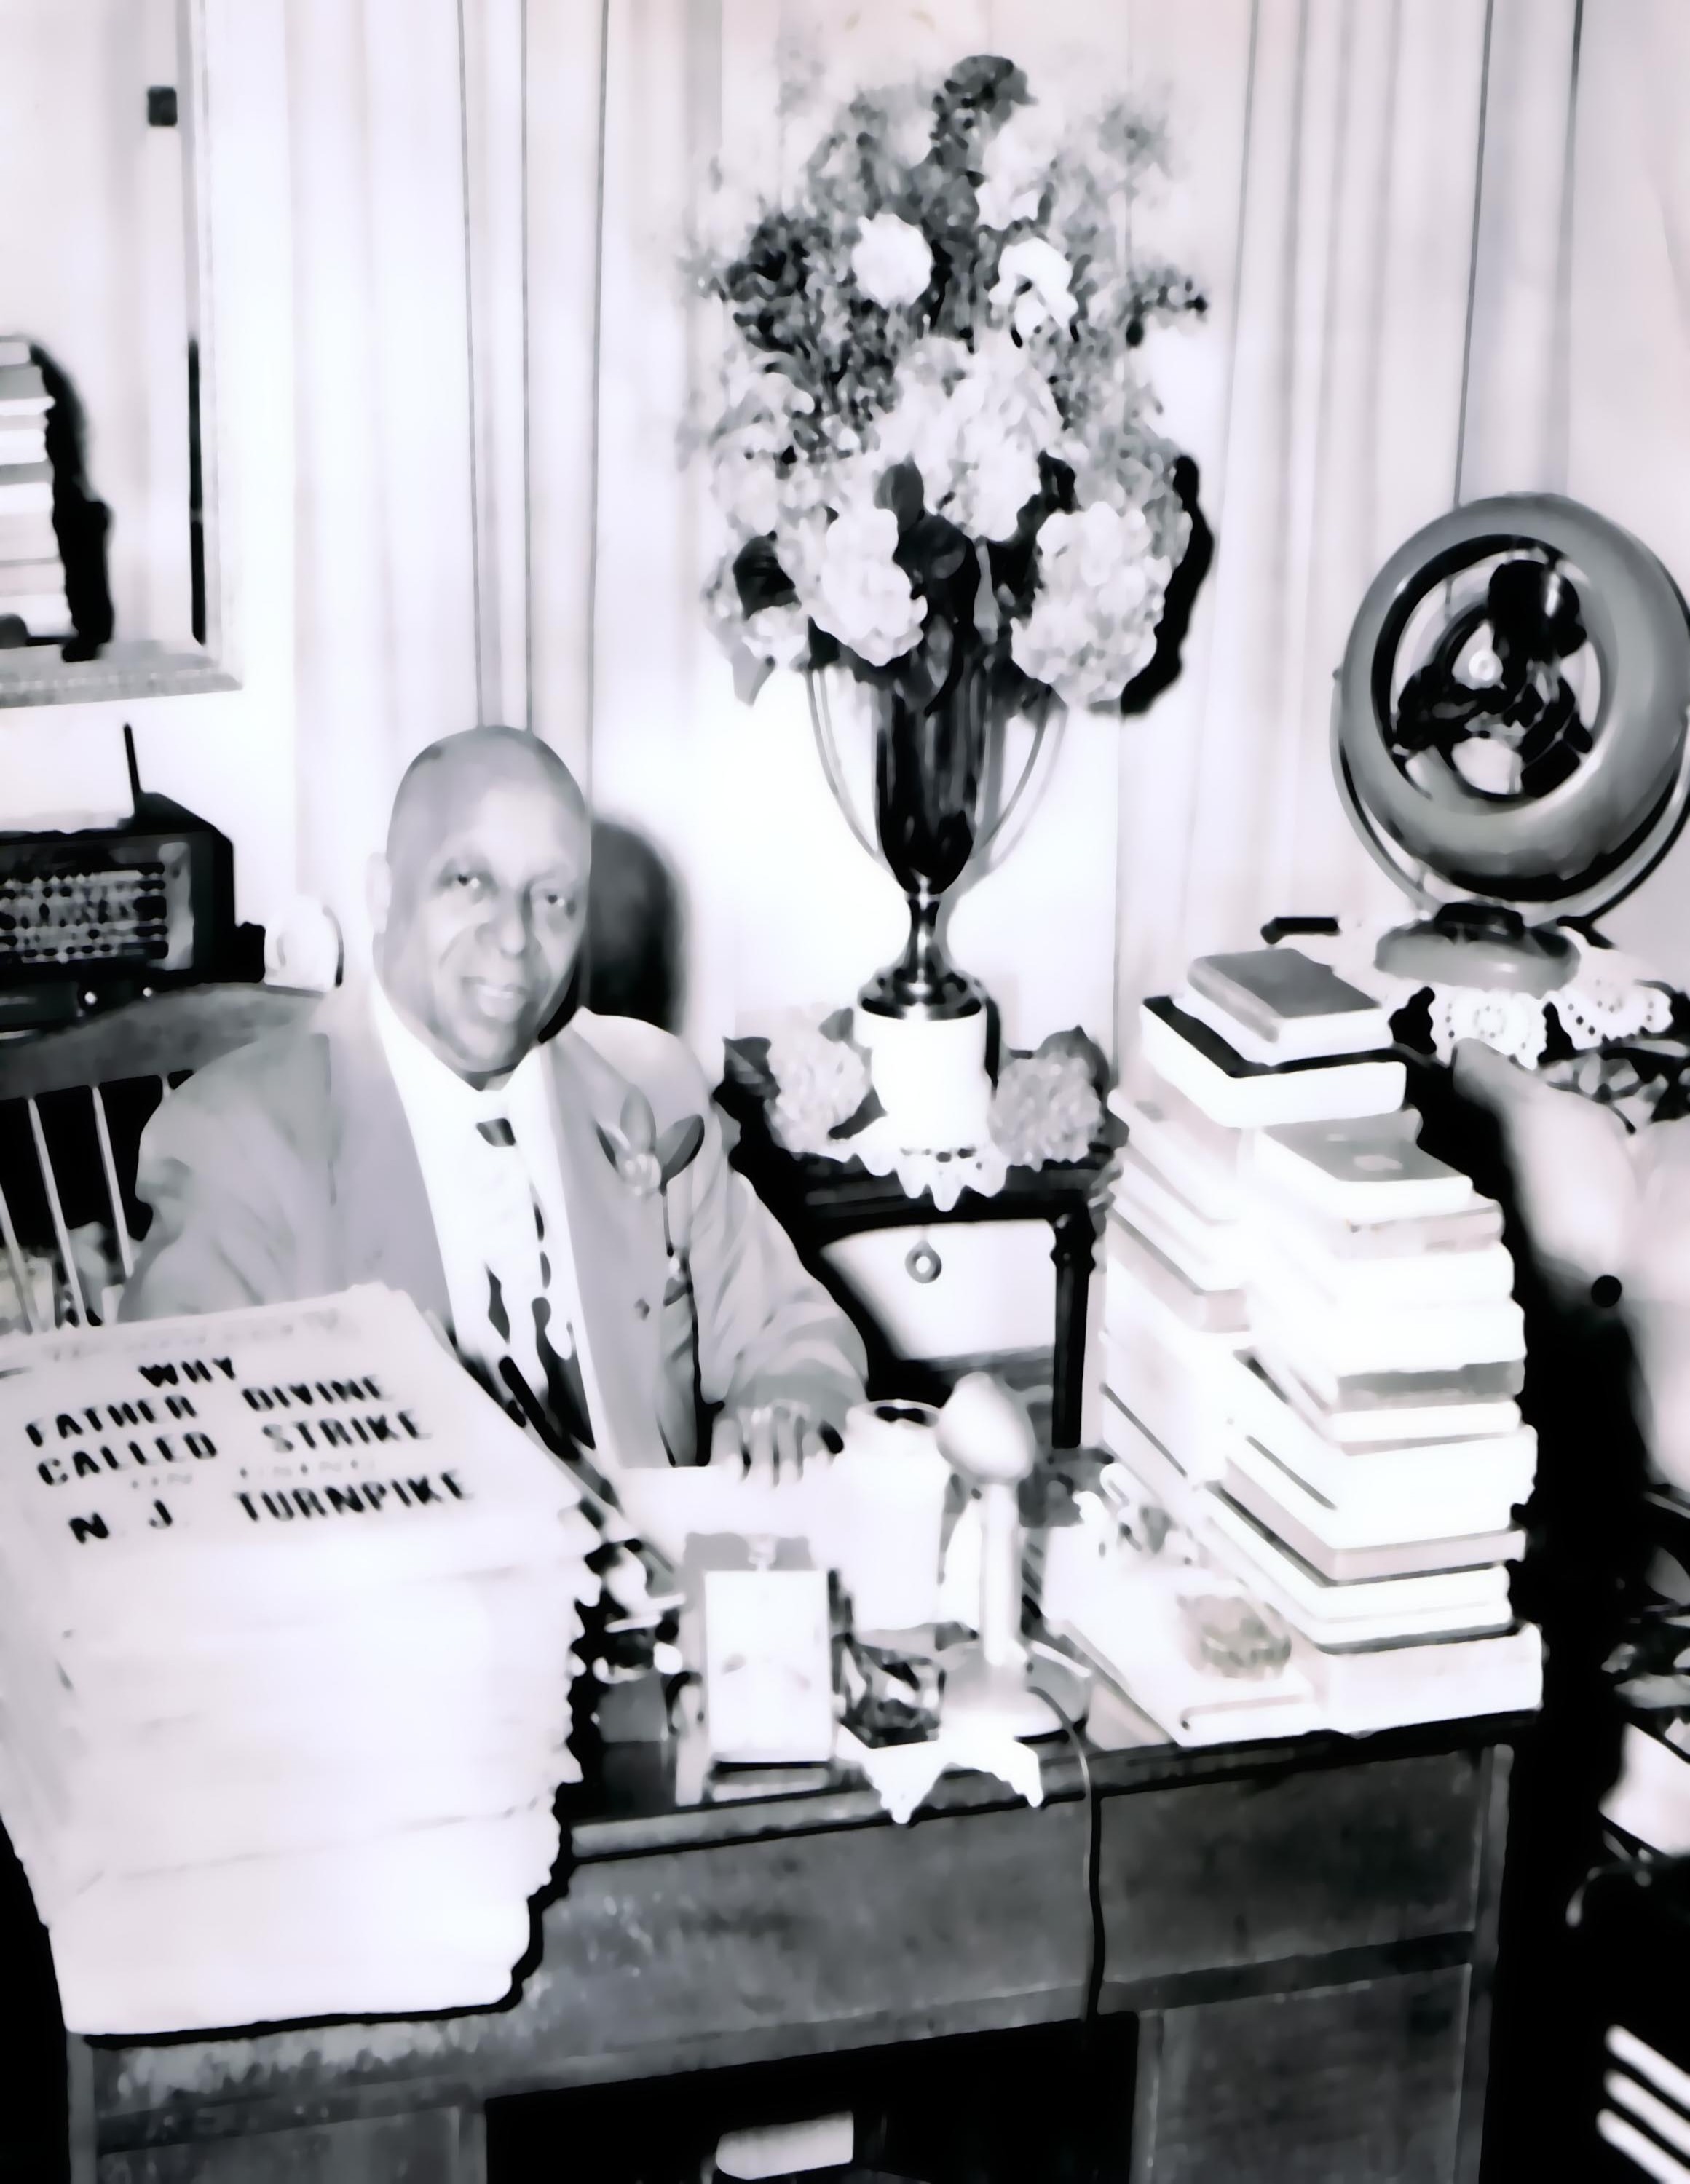 FATHER DIVINE in His Circle Mission Church Private Office